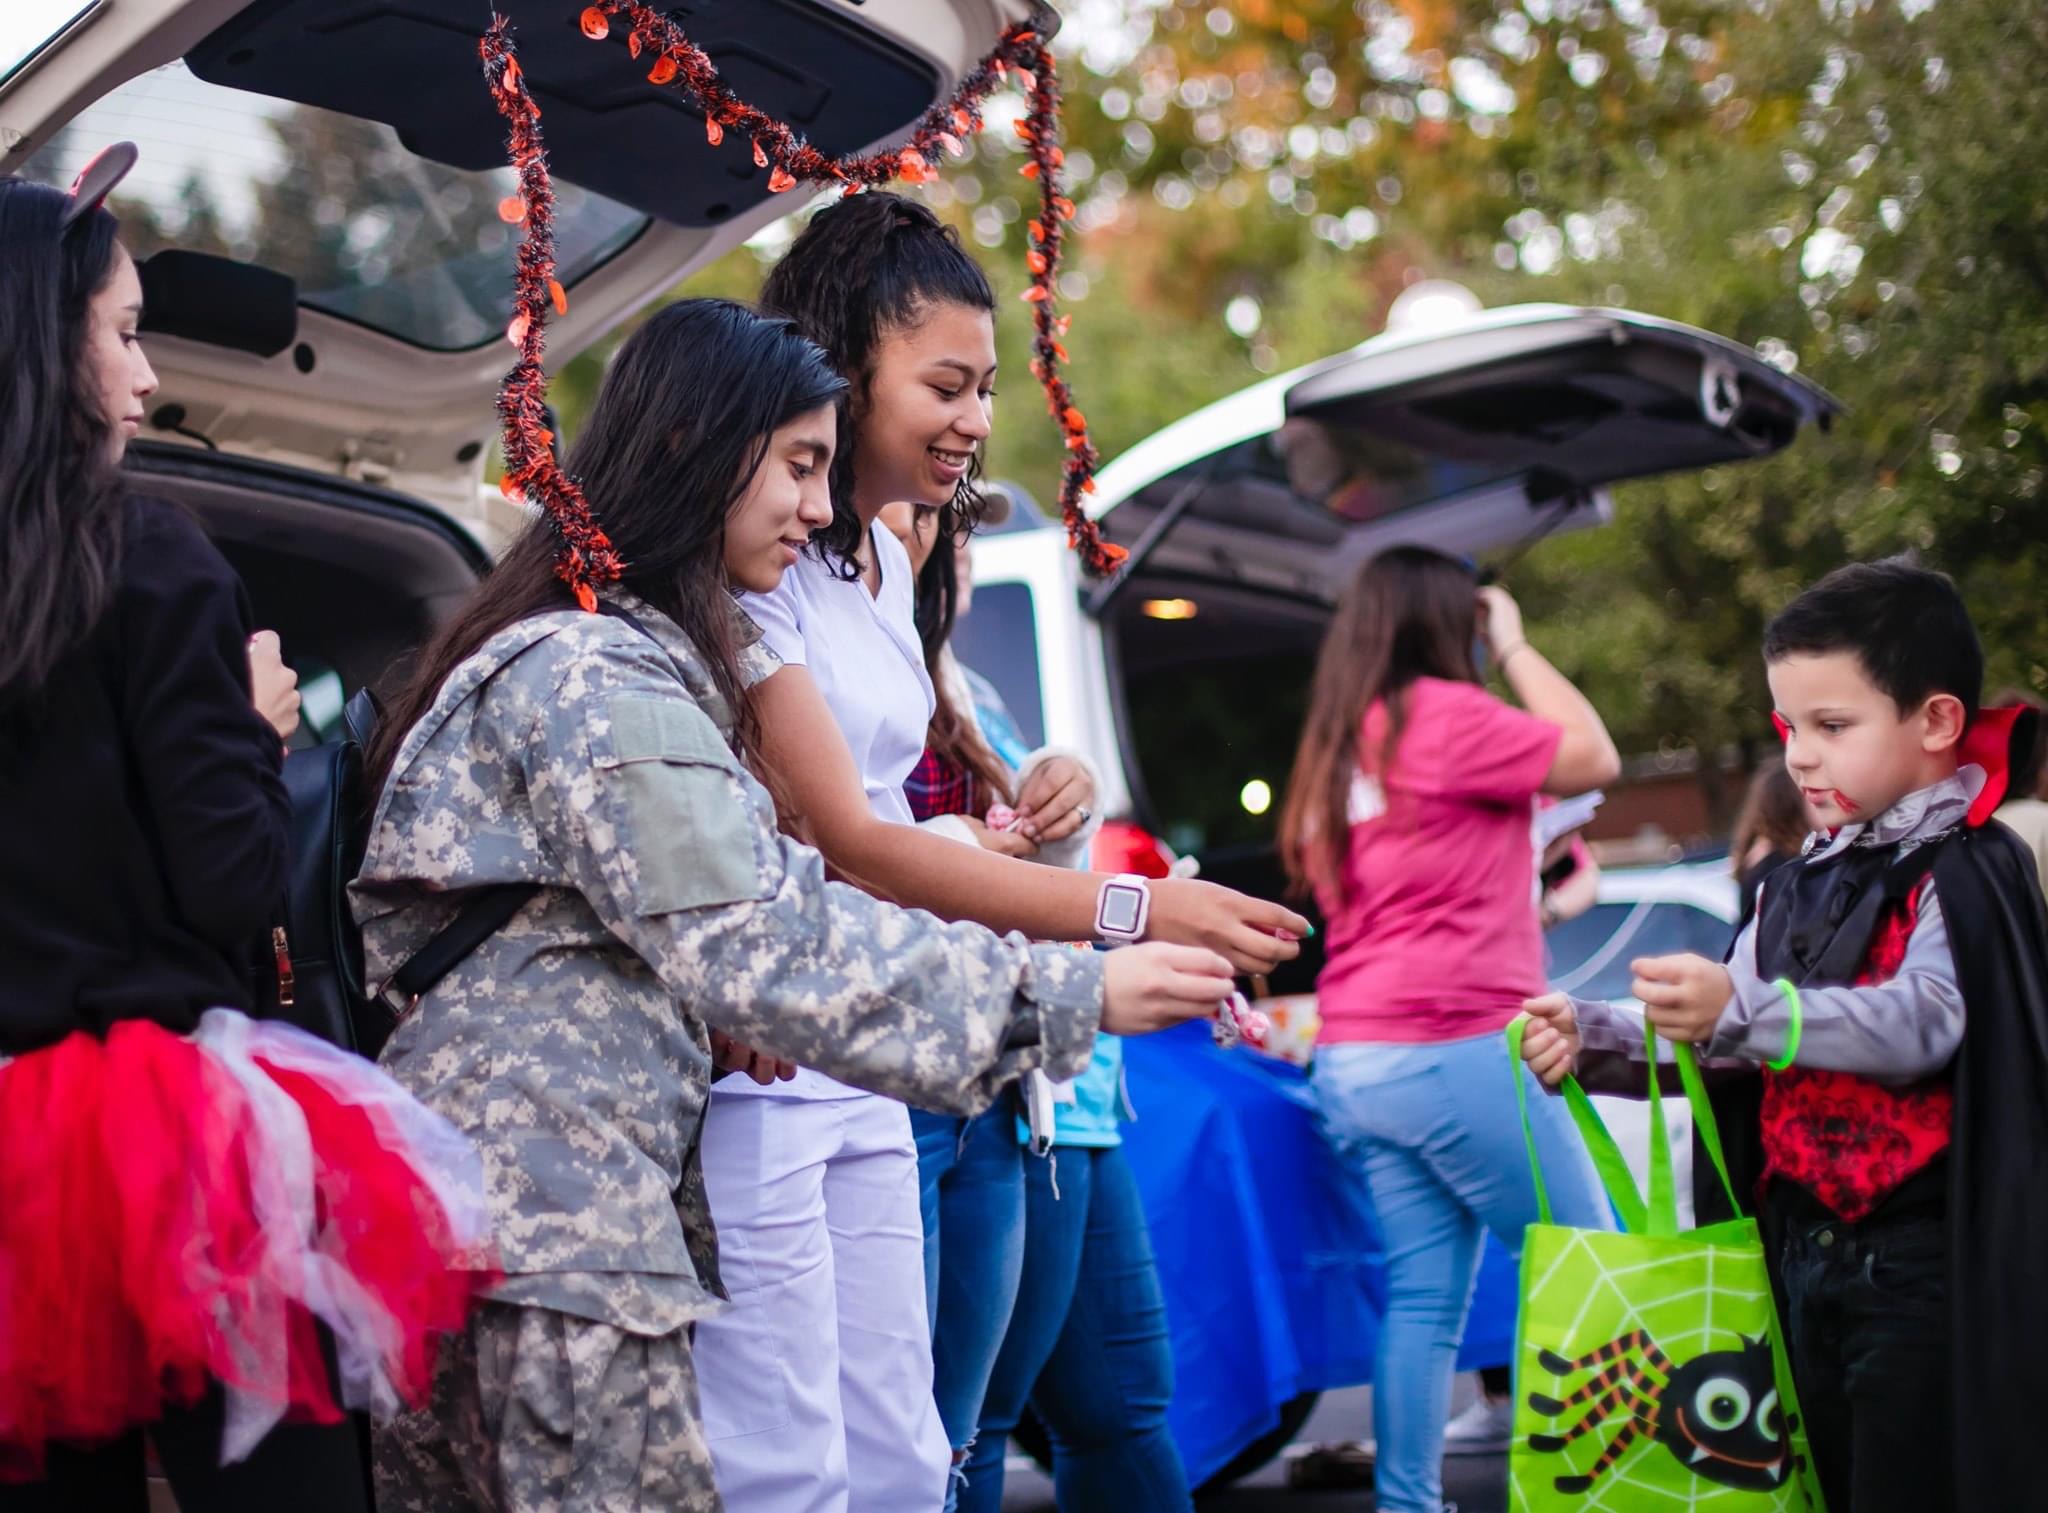 A child visits a trunk or treat stand with candy.